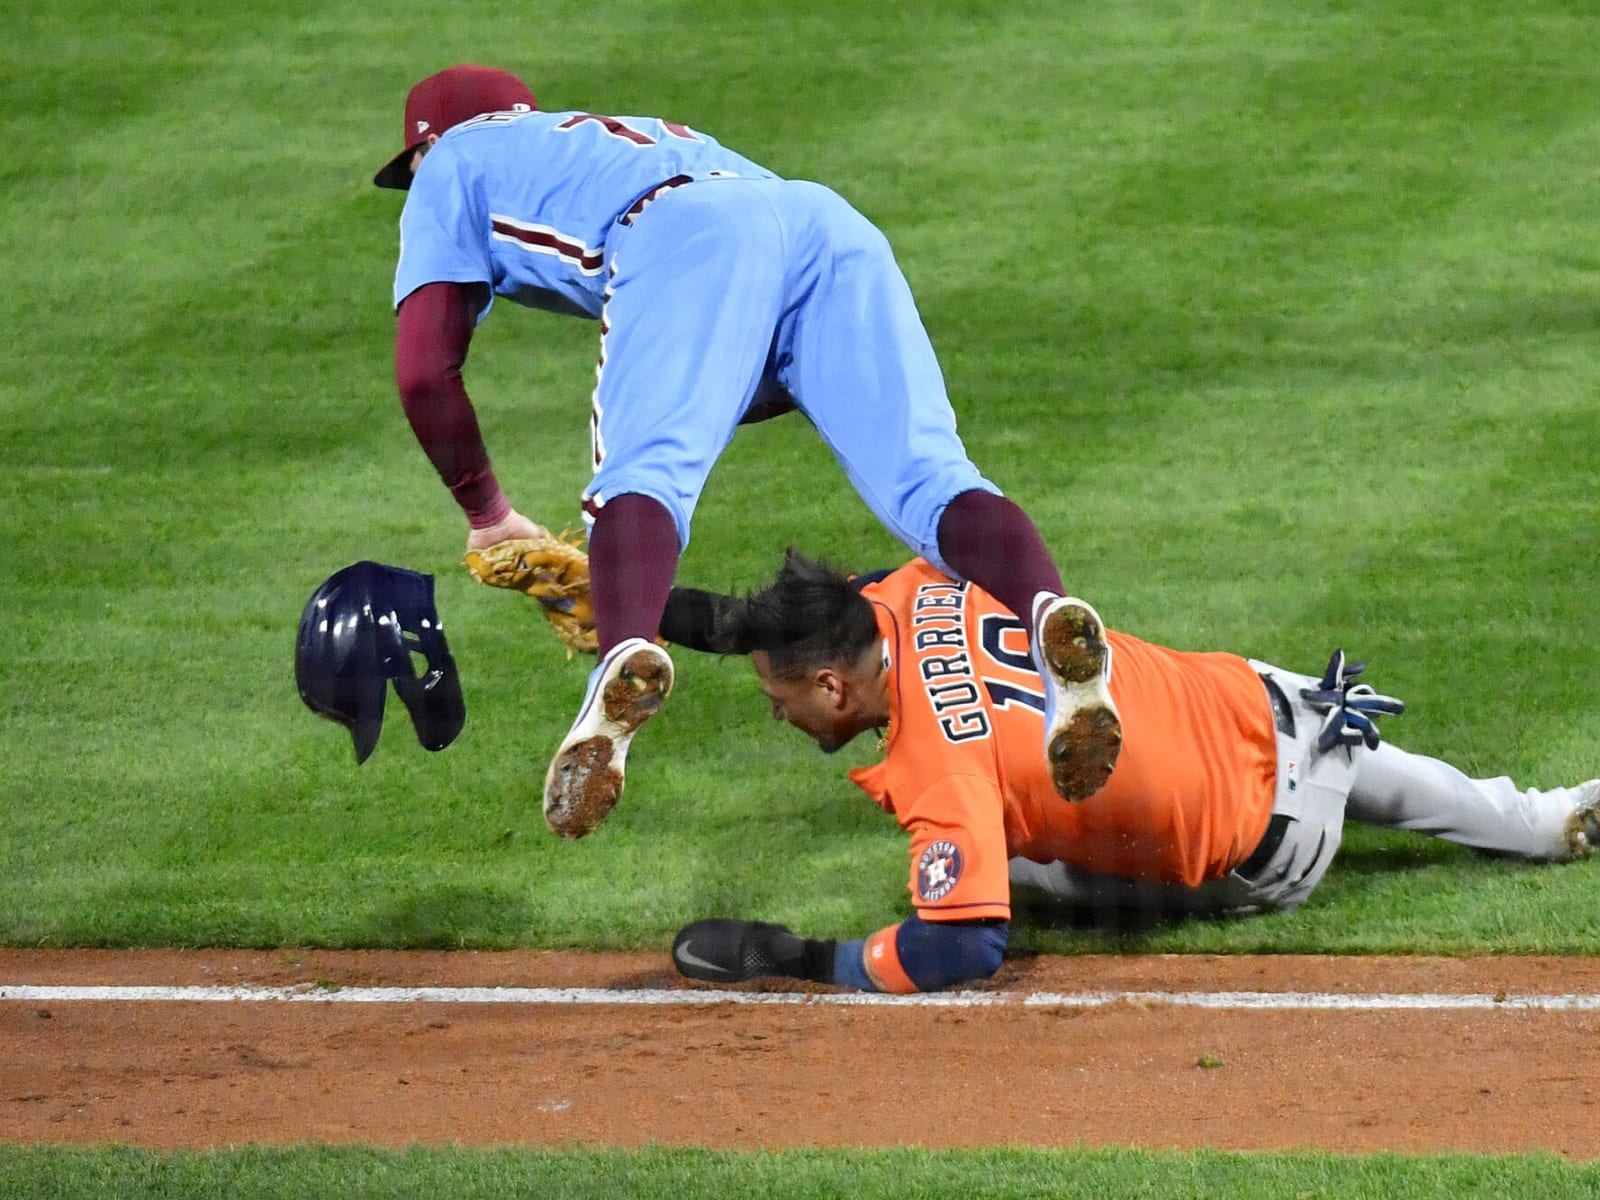 Houston Astros: Yuli Gurriel removed from World Series roster